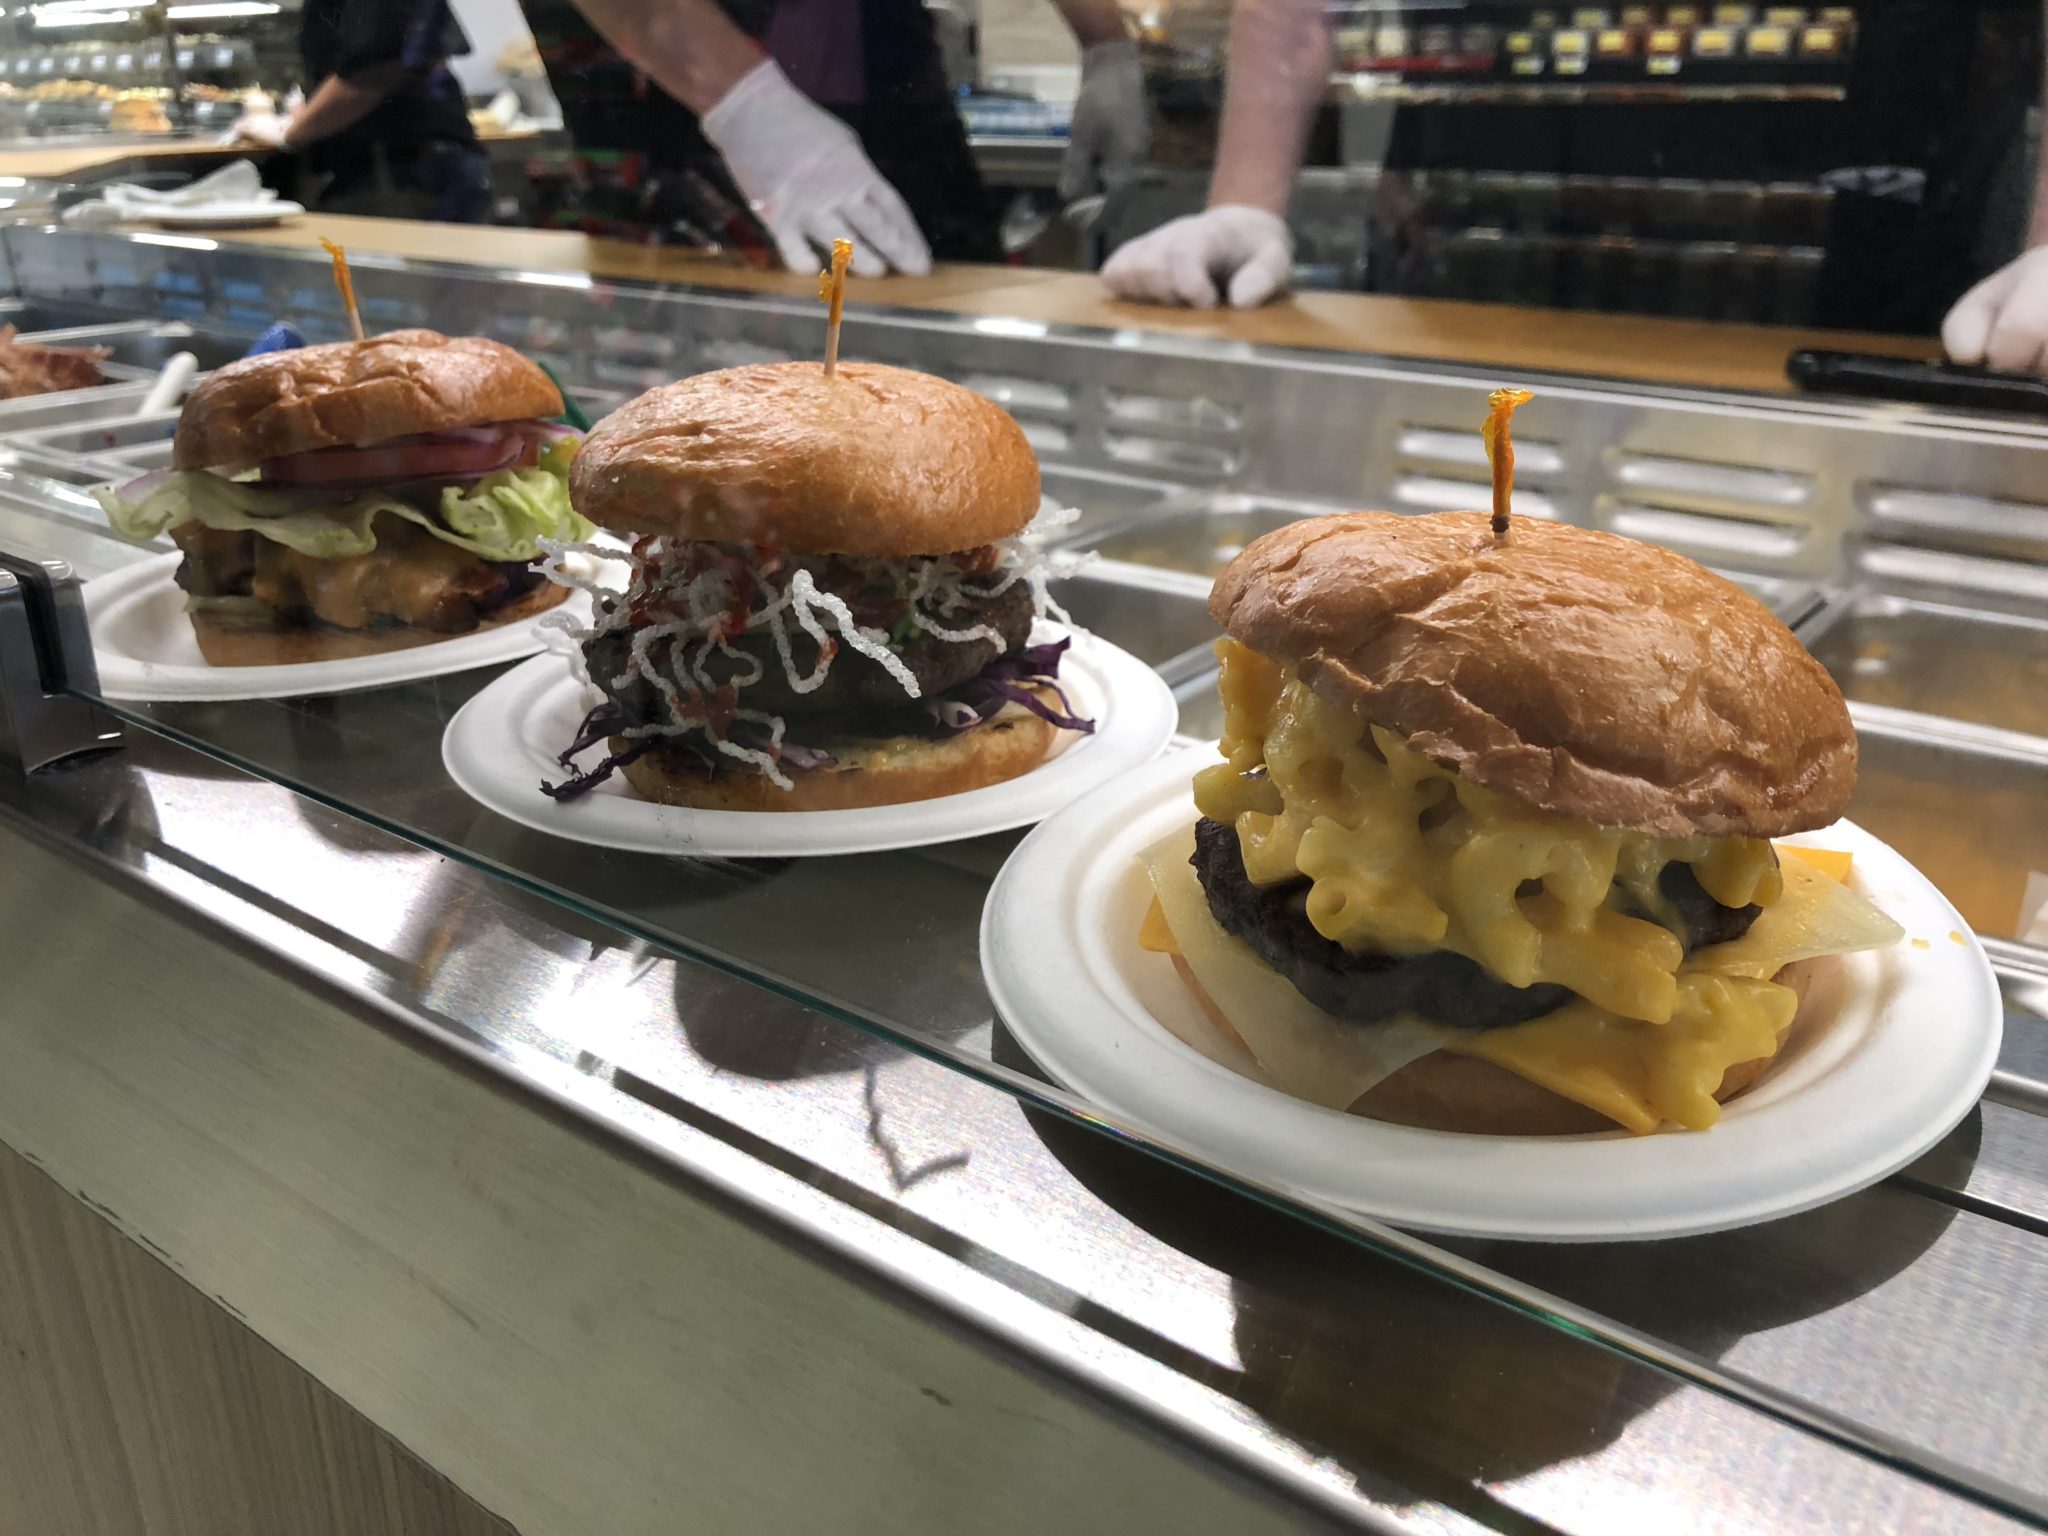 Gourmet burgers and sandwiches at the Action Station Grill in the Albertsons in Boise, Idaho